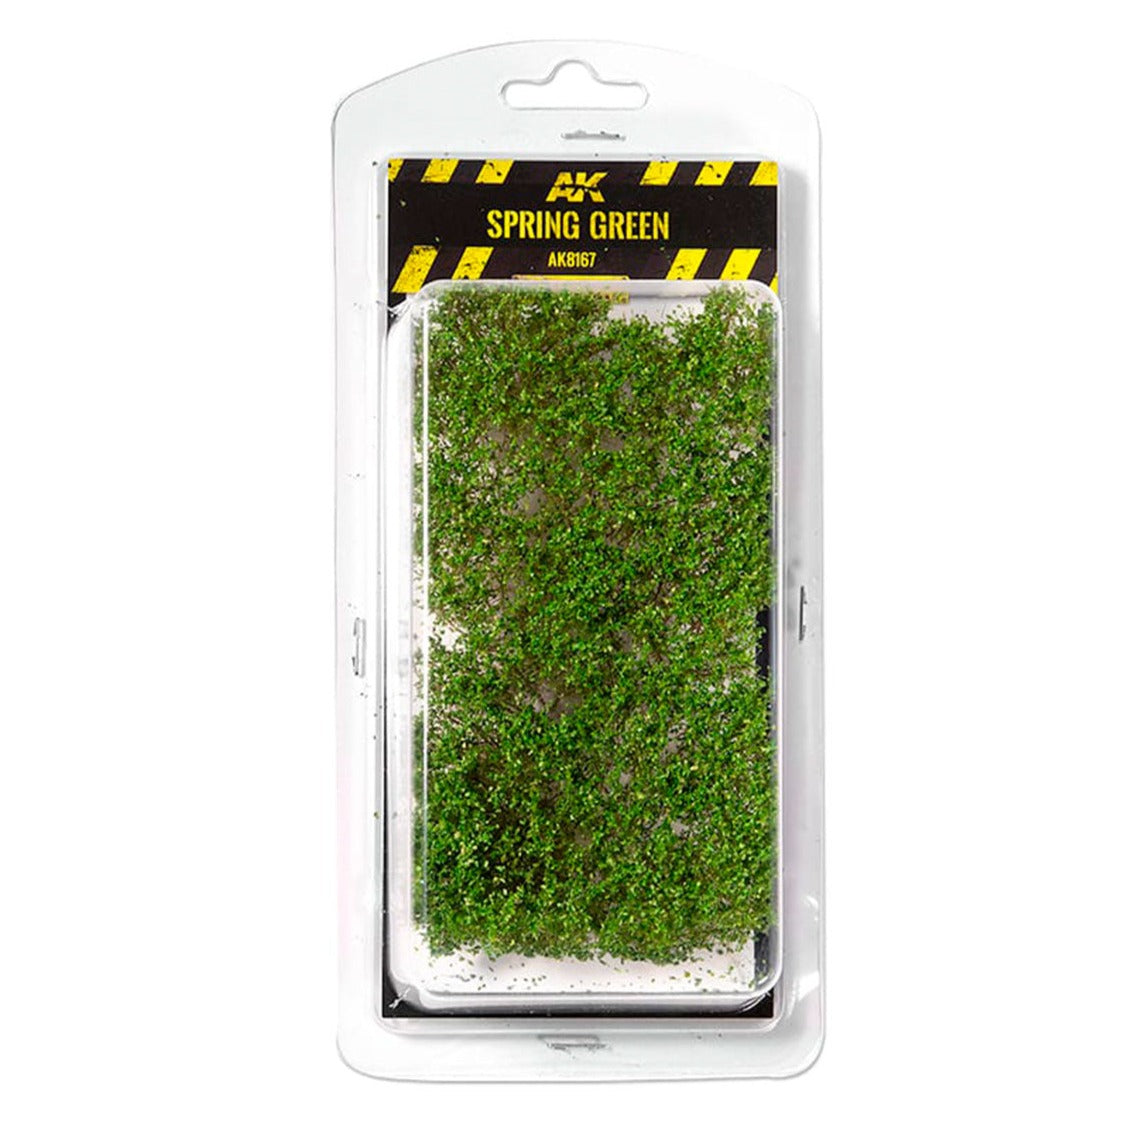 SPRING GREEN SHRUBBERIES - Loaded Dice Barry Vale of Glamorgan CF64 3HD